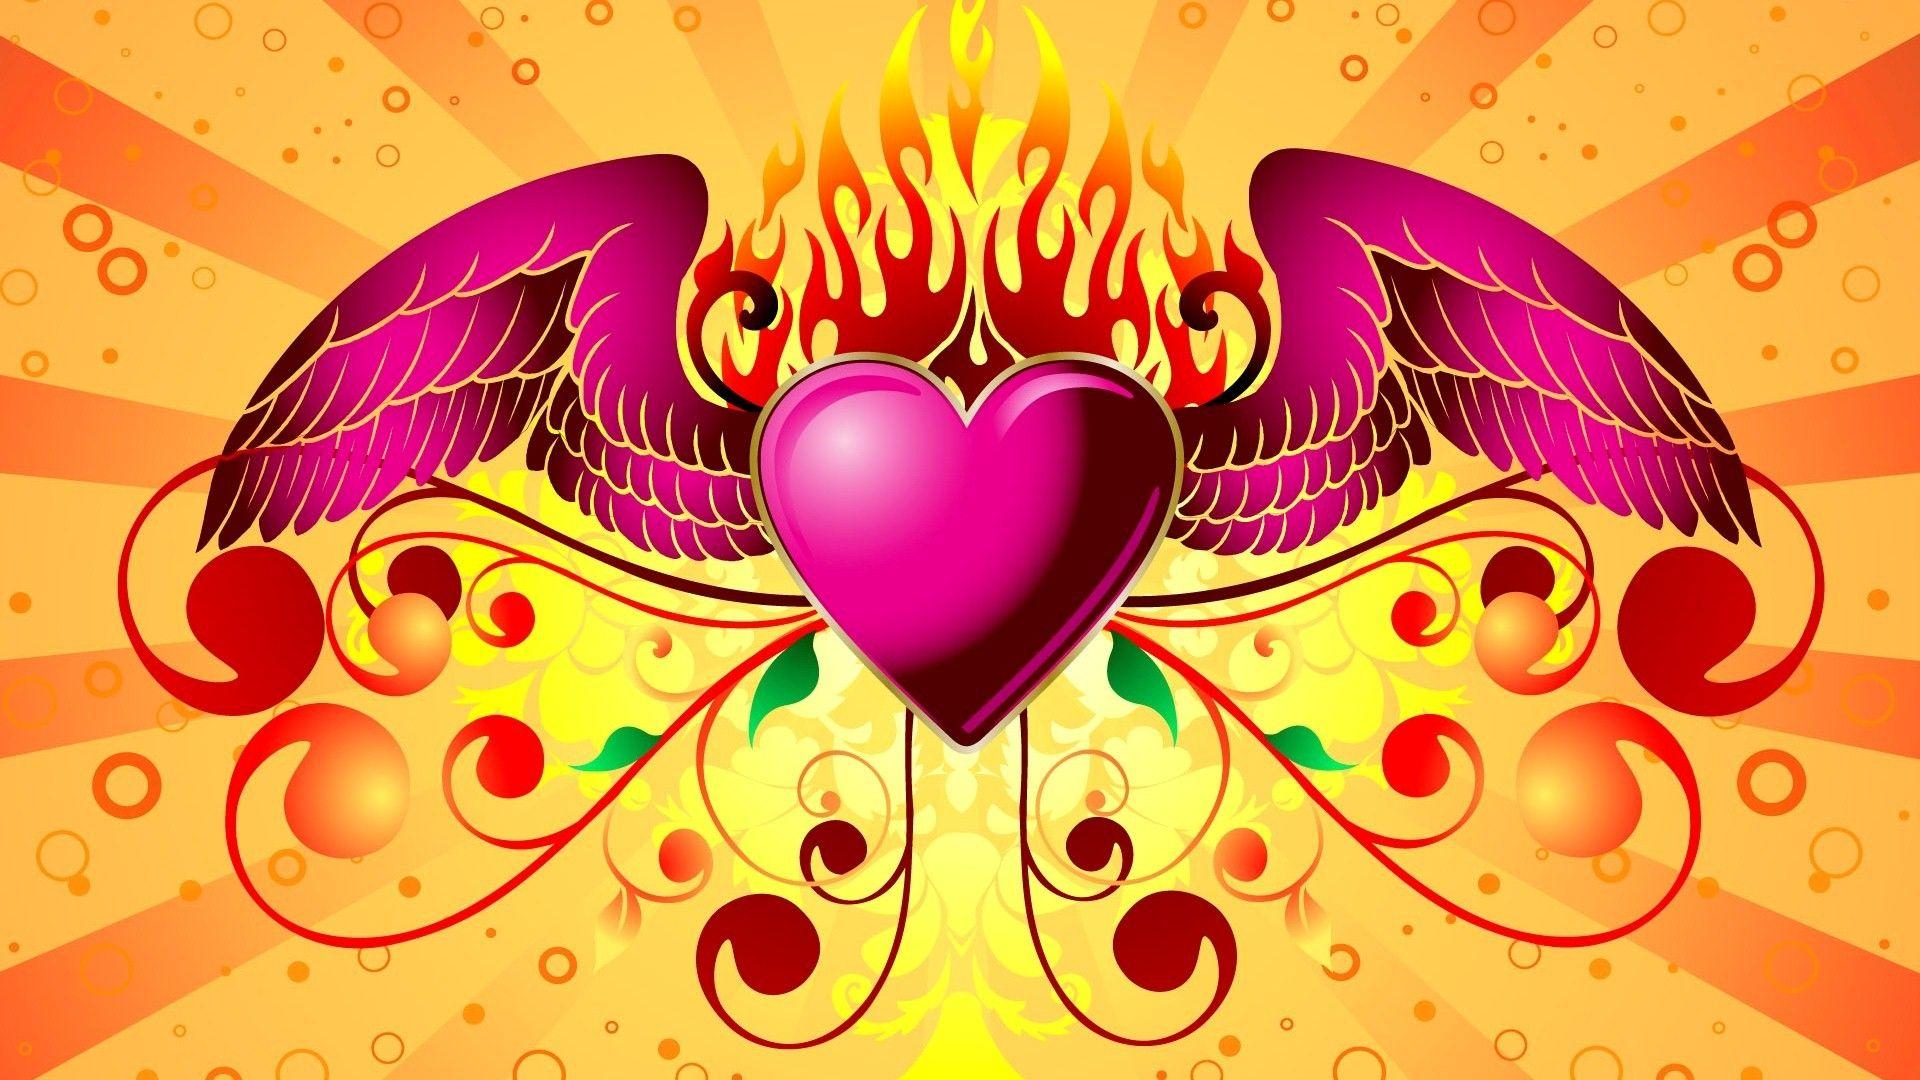 Heart With Wings Wallpapers  Wallpaper Cave